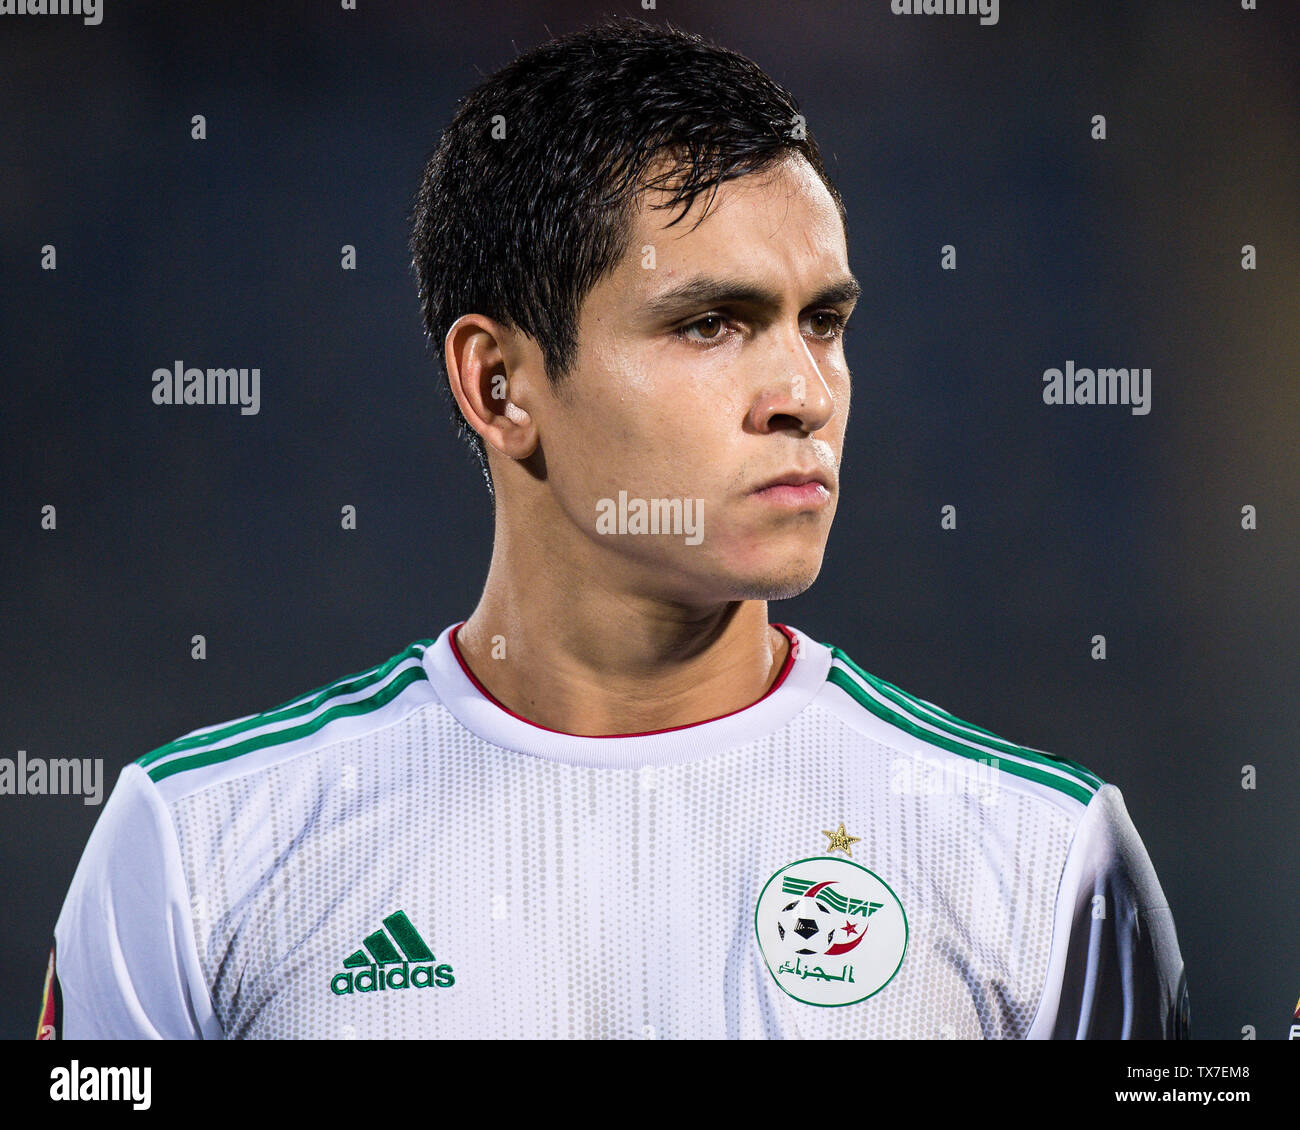 CAIRO, EGYPT - JUNE 23: Aissa Mandi of Algeria looks on during the 2019 Africa Cup of Nations Group C match between Algeria and Kenya at 30 June Stadium on June 23, 2019 in Cairo, Egypt. (Sebastian Frej/MB Media) Stock Photo